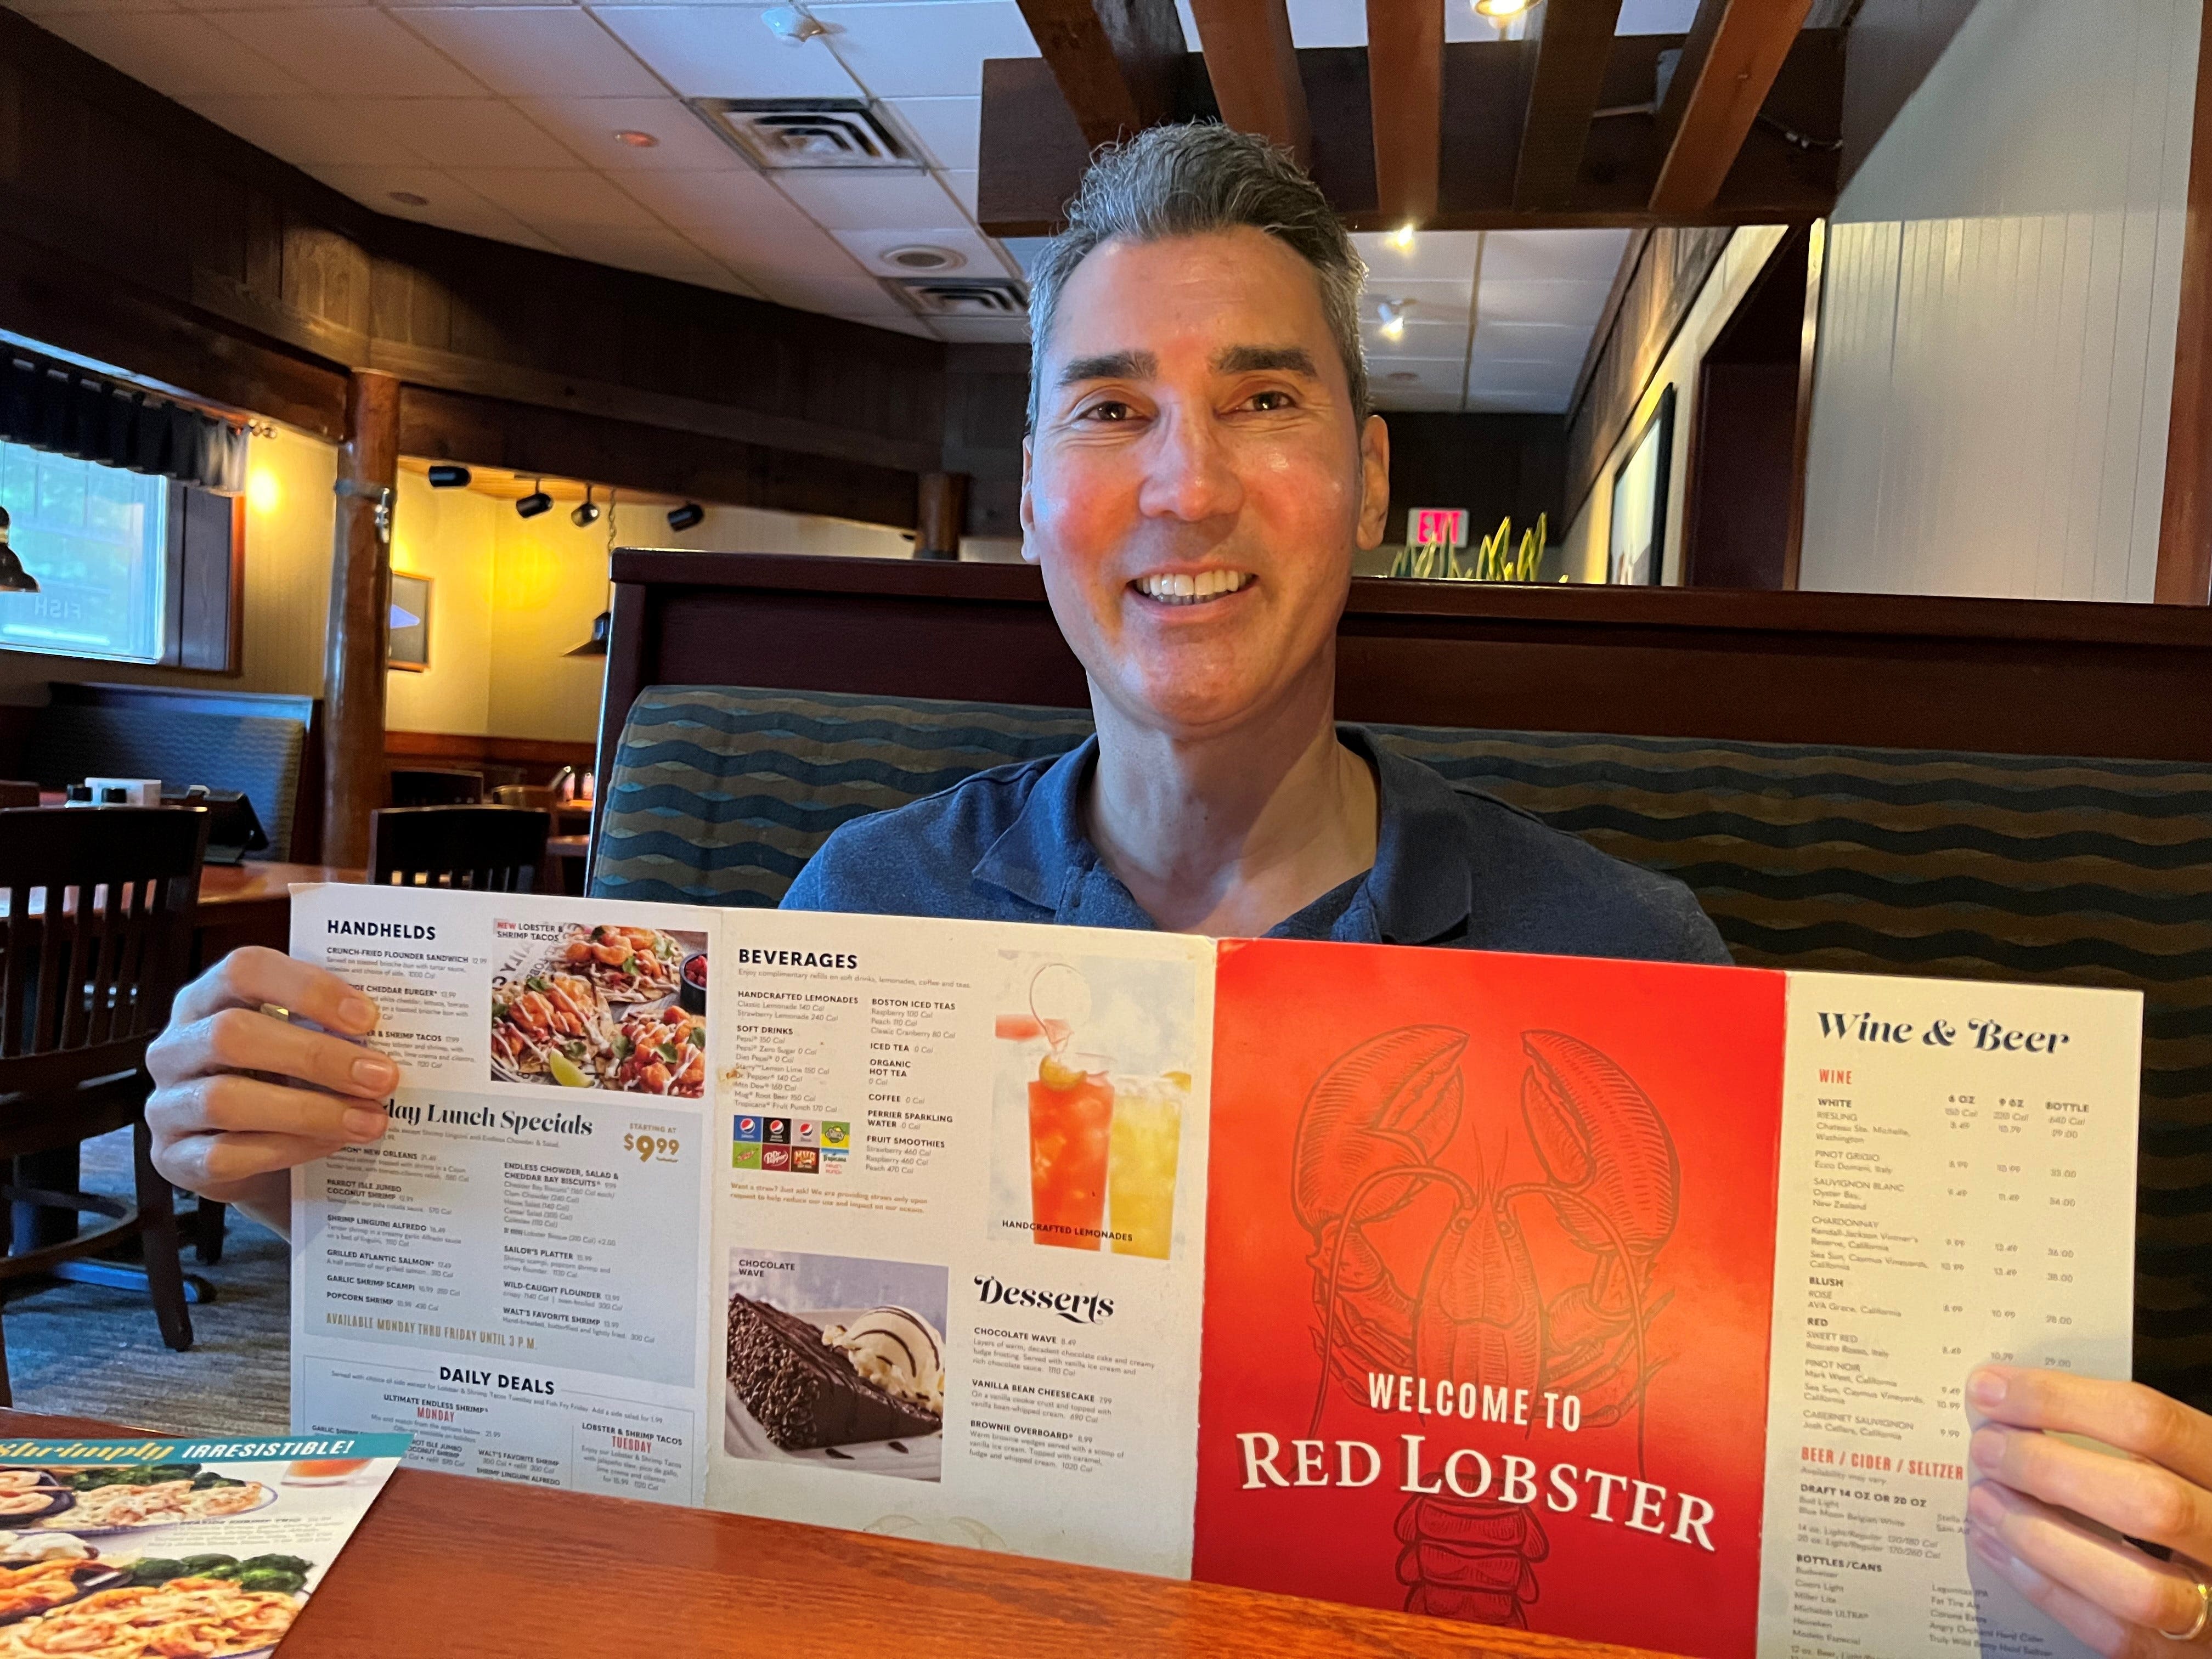 I eat at Red Lobster once a year. The seafood chain’s bankruptcy hurts this Tennessean's heart